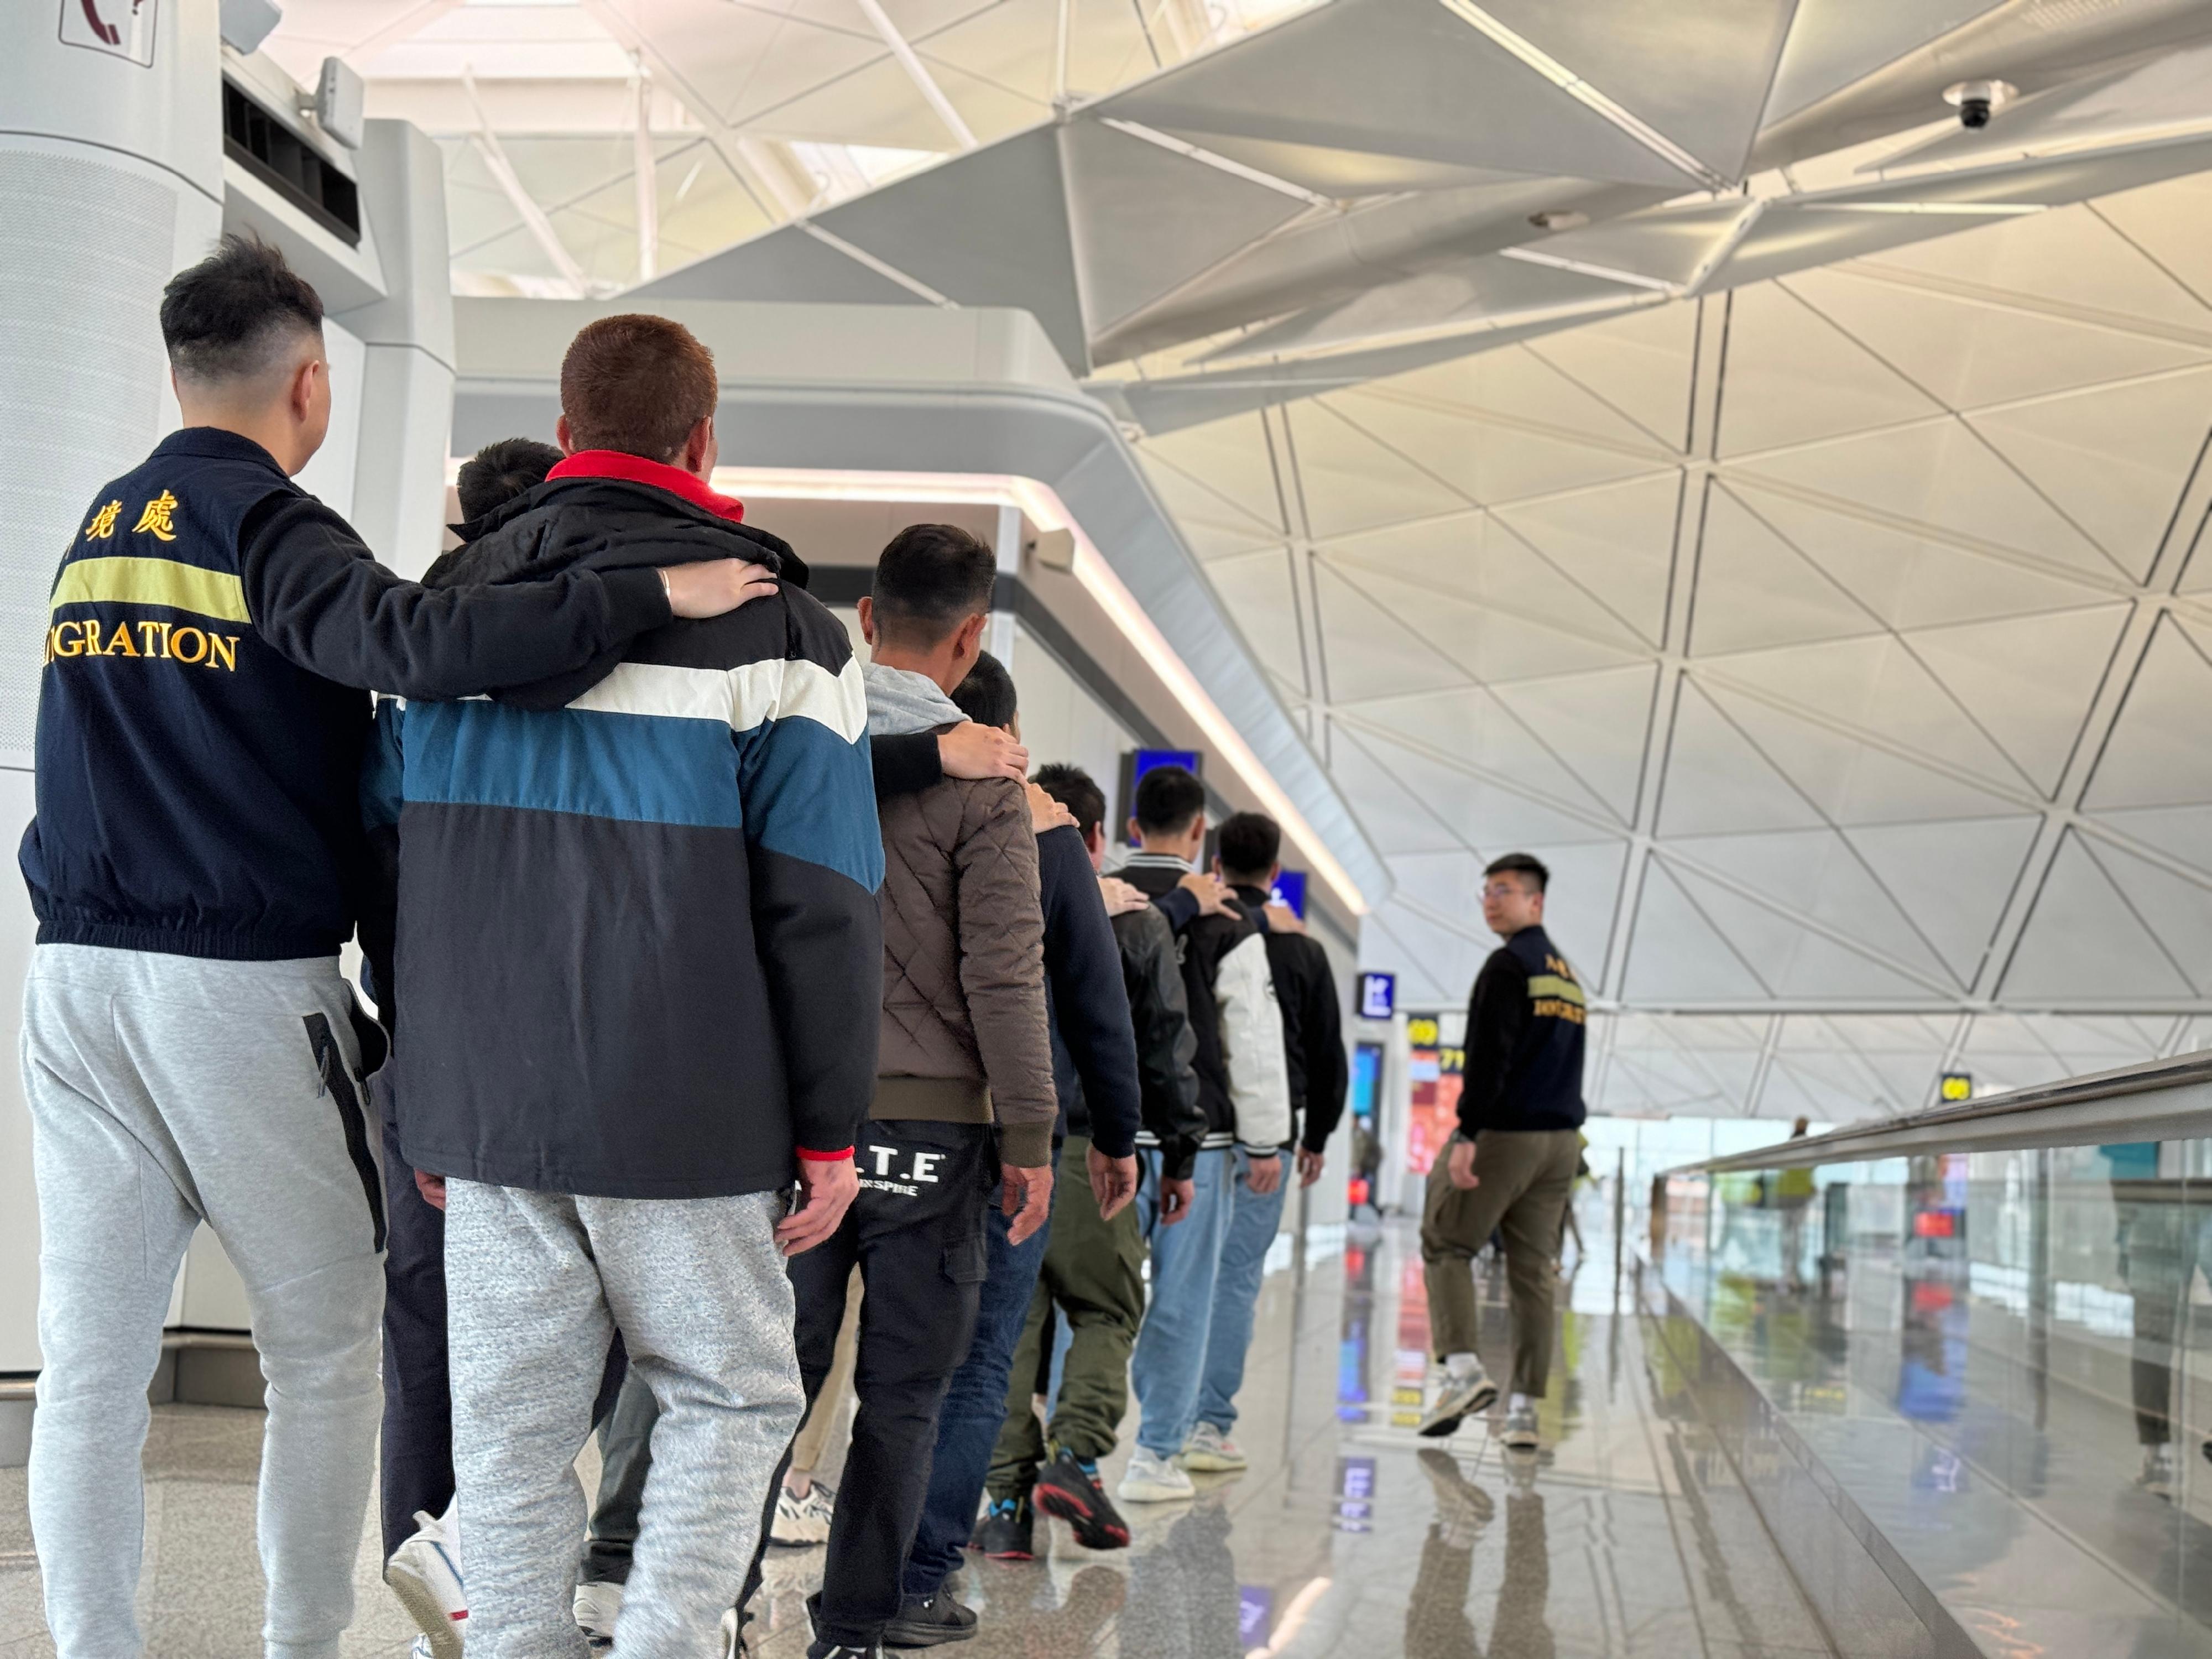 The Immigration Department (ImmD) carried out a repatriation operation today (January 24). A total of 34 Vietnamese illegal immigrants and overstayers were repatriated to Vietnam. Photo shows removees being escorted by ImmD officers to depart from Hong Kong.

